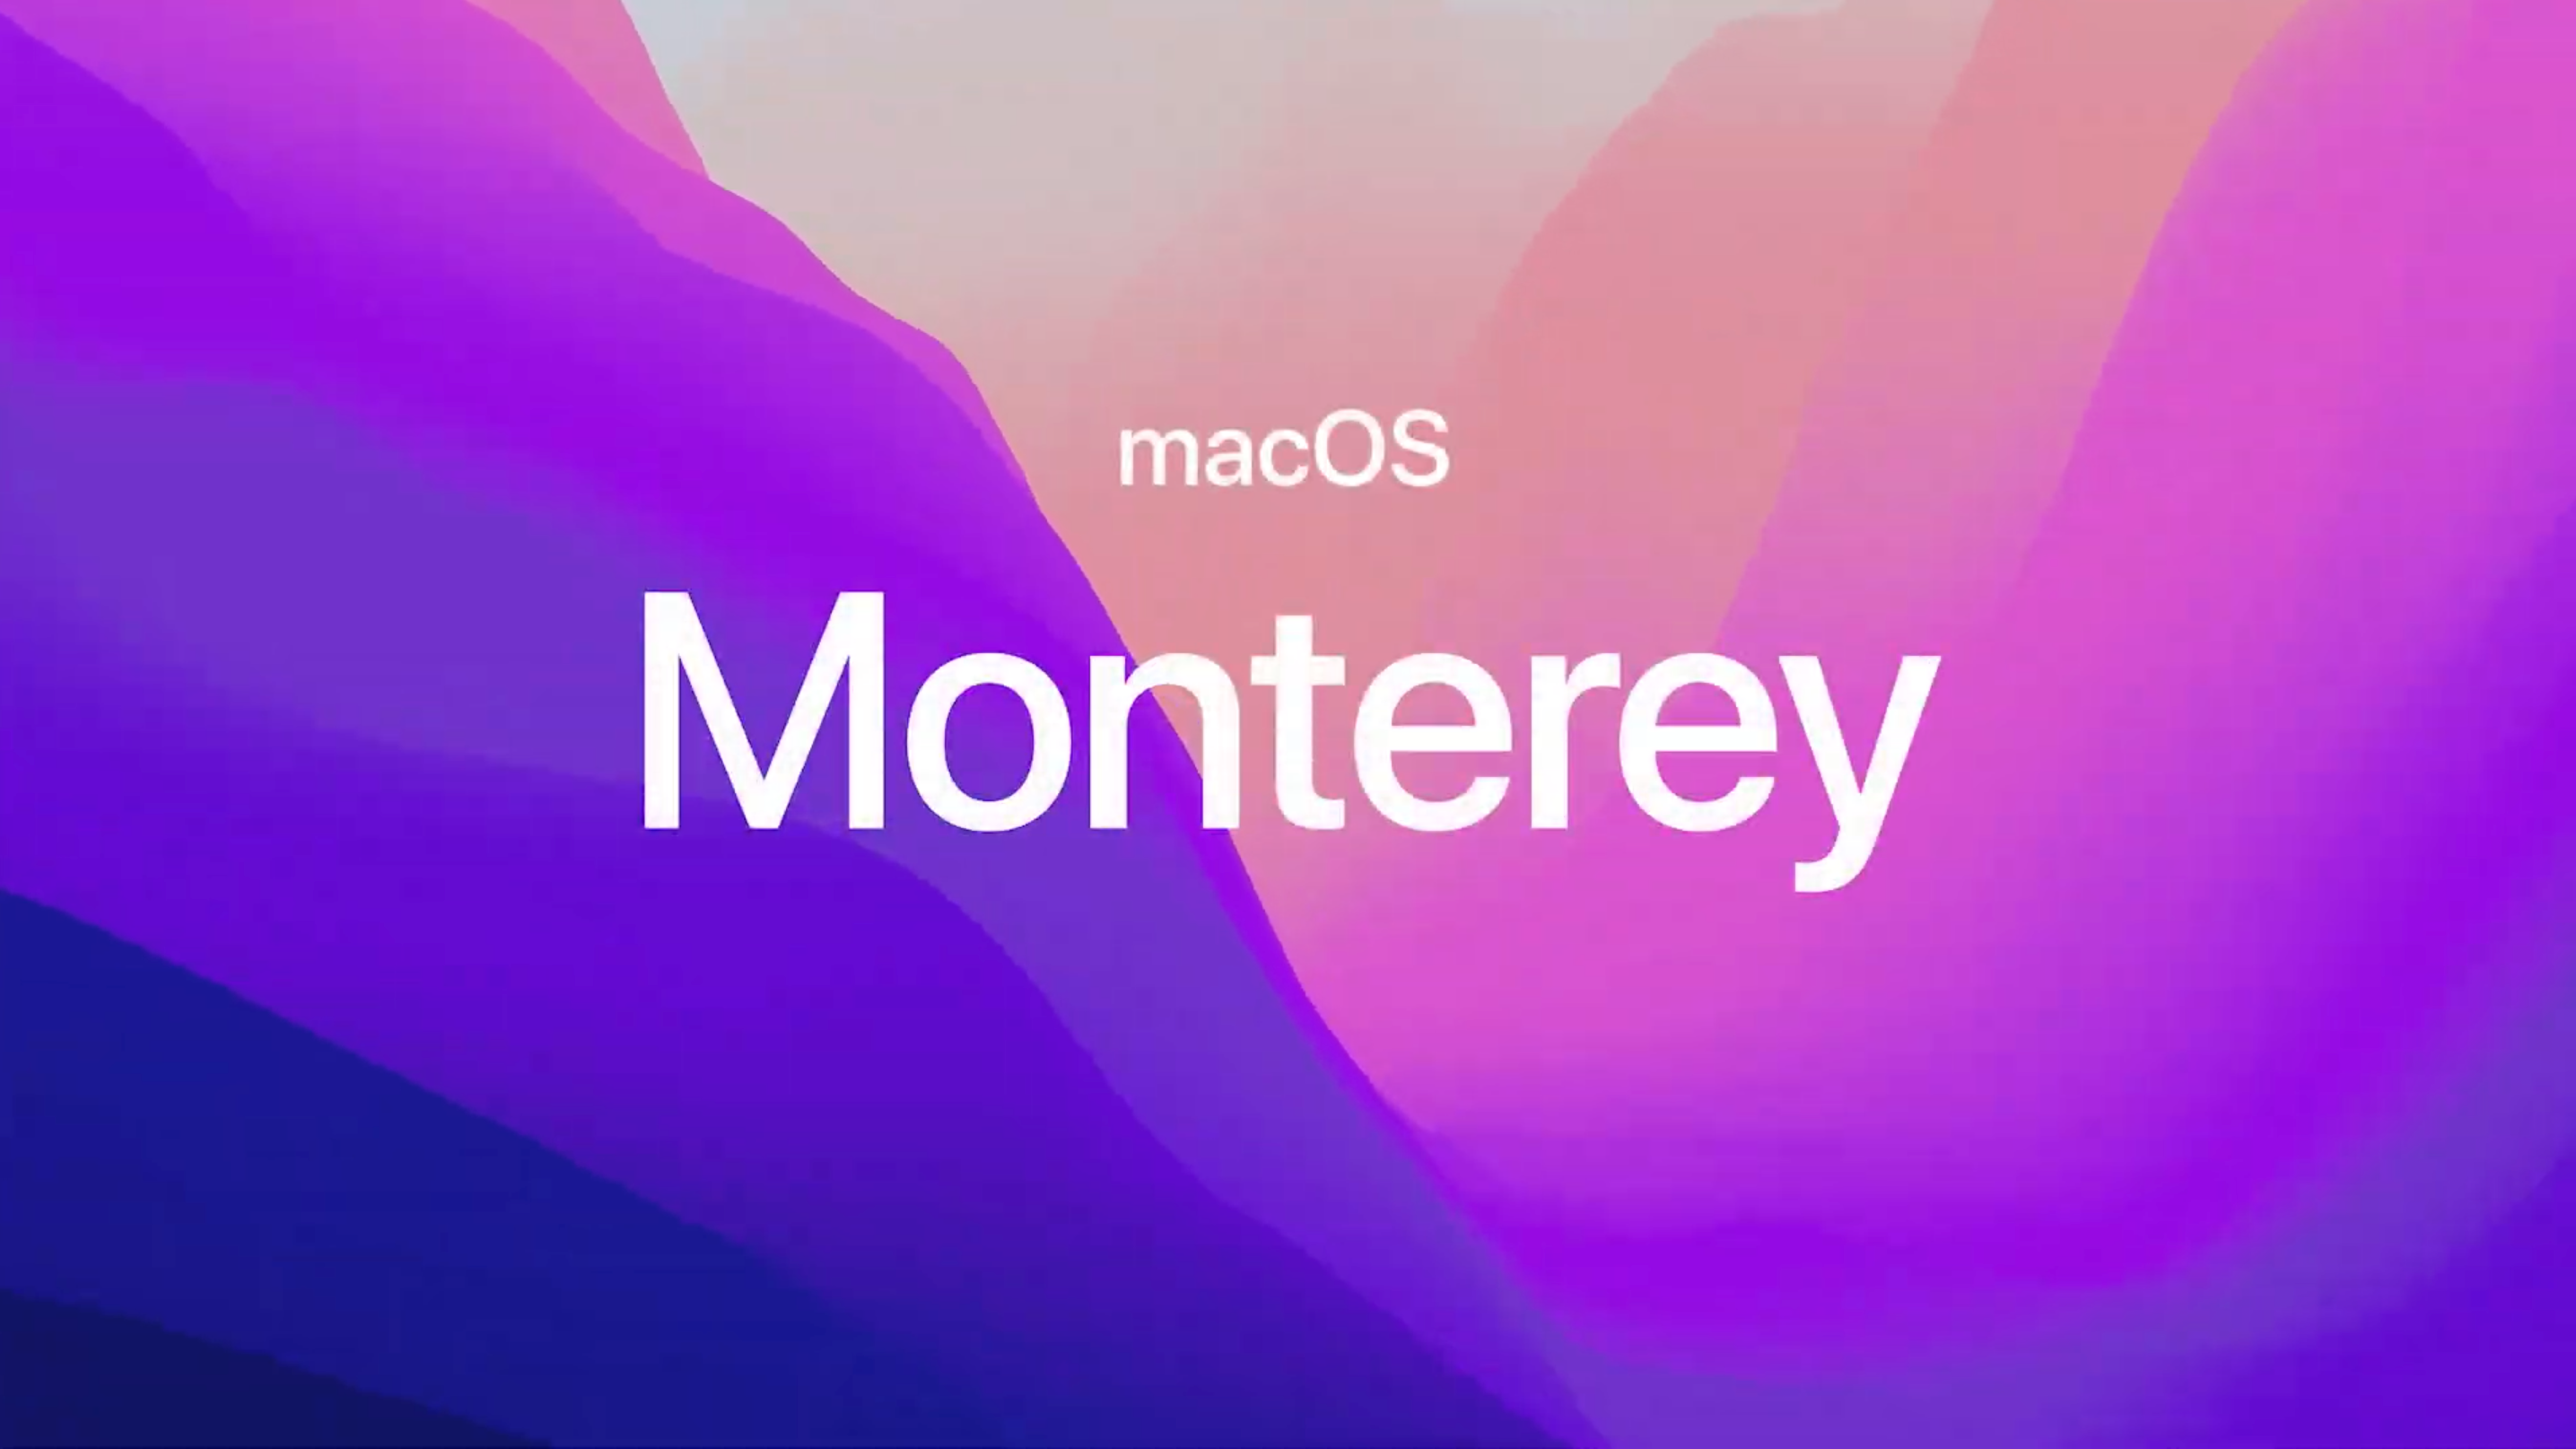 macOS Monterey: New features coming to iMac and MacBook on October 25